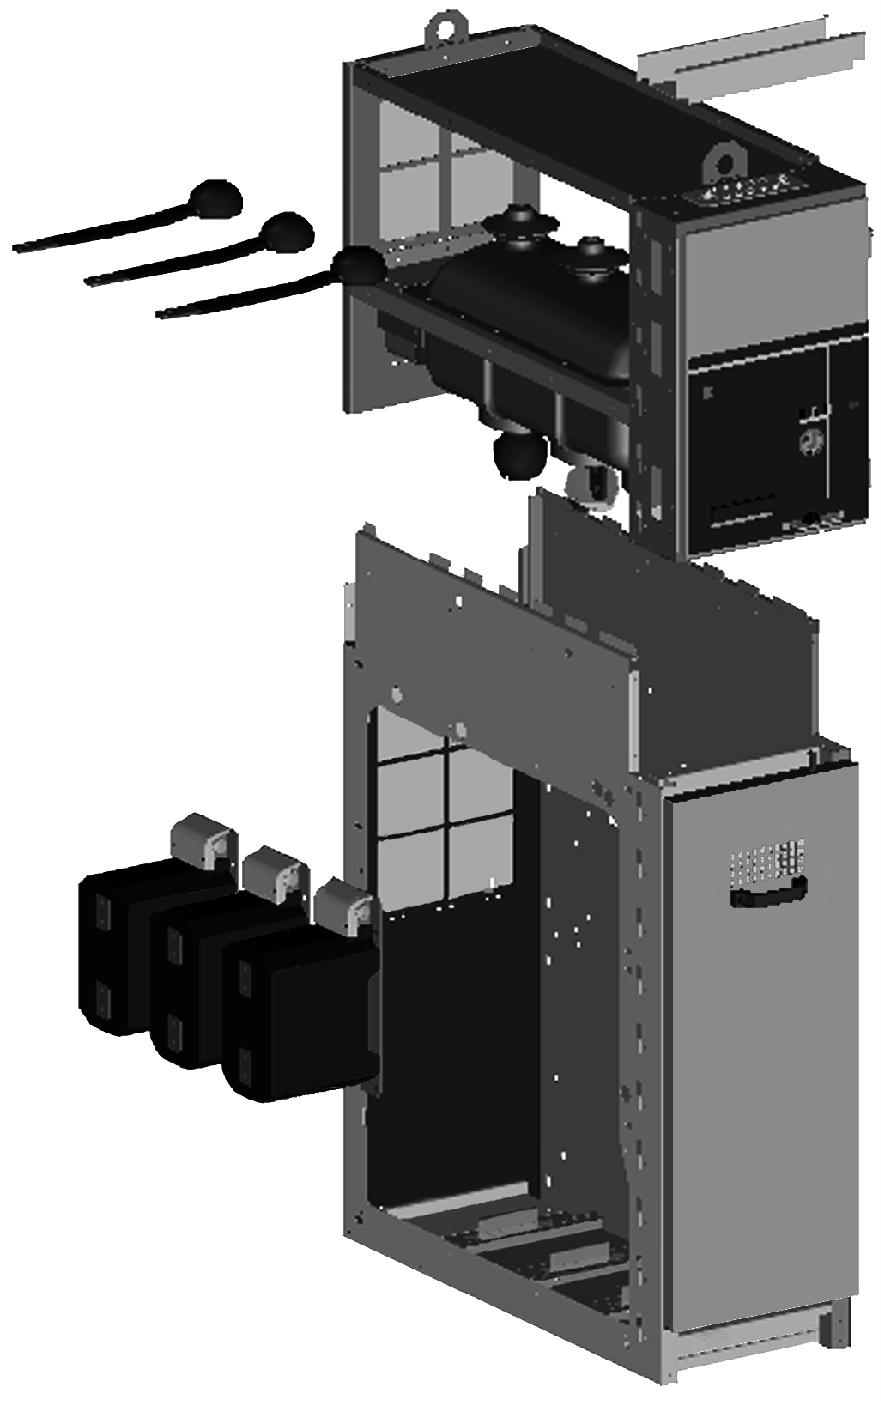 3. Switchgear Construction Primary part 1 2 1 Top unit - 3-position switch disconnector SFG - Operating mechanism with mechanical position indication - Enclosure of busbar compartment - Integrated